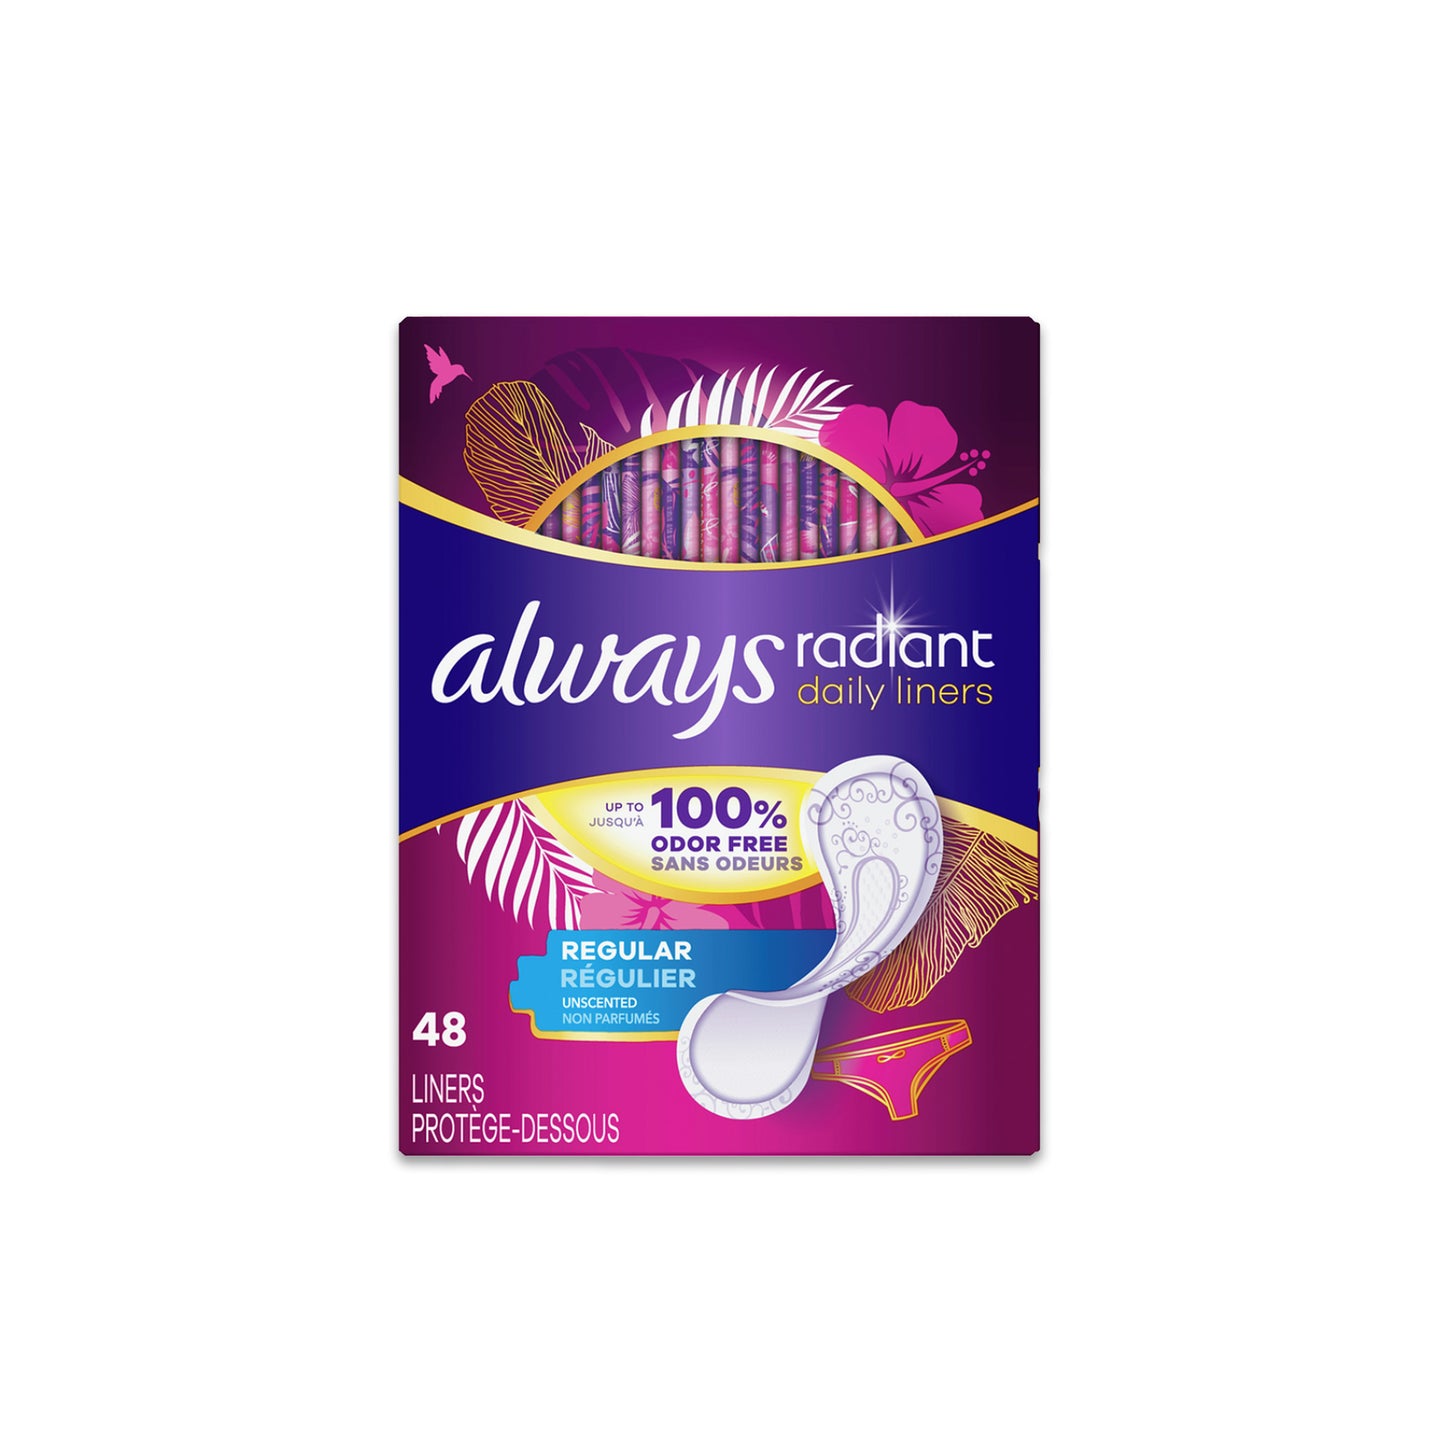 ALWAYS - Radiant Daily Panty Liners